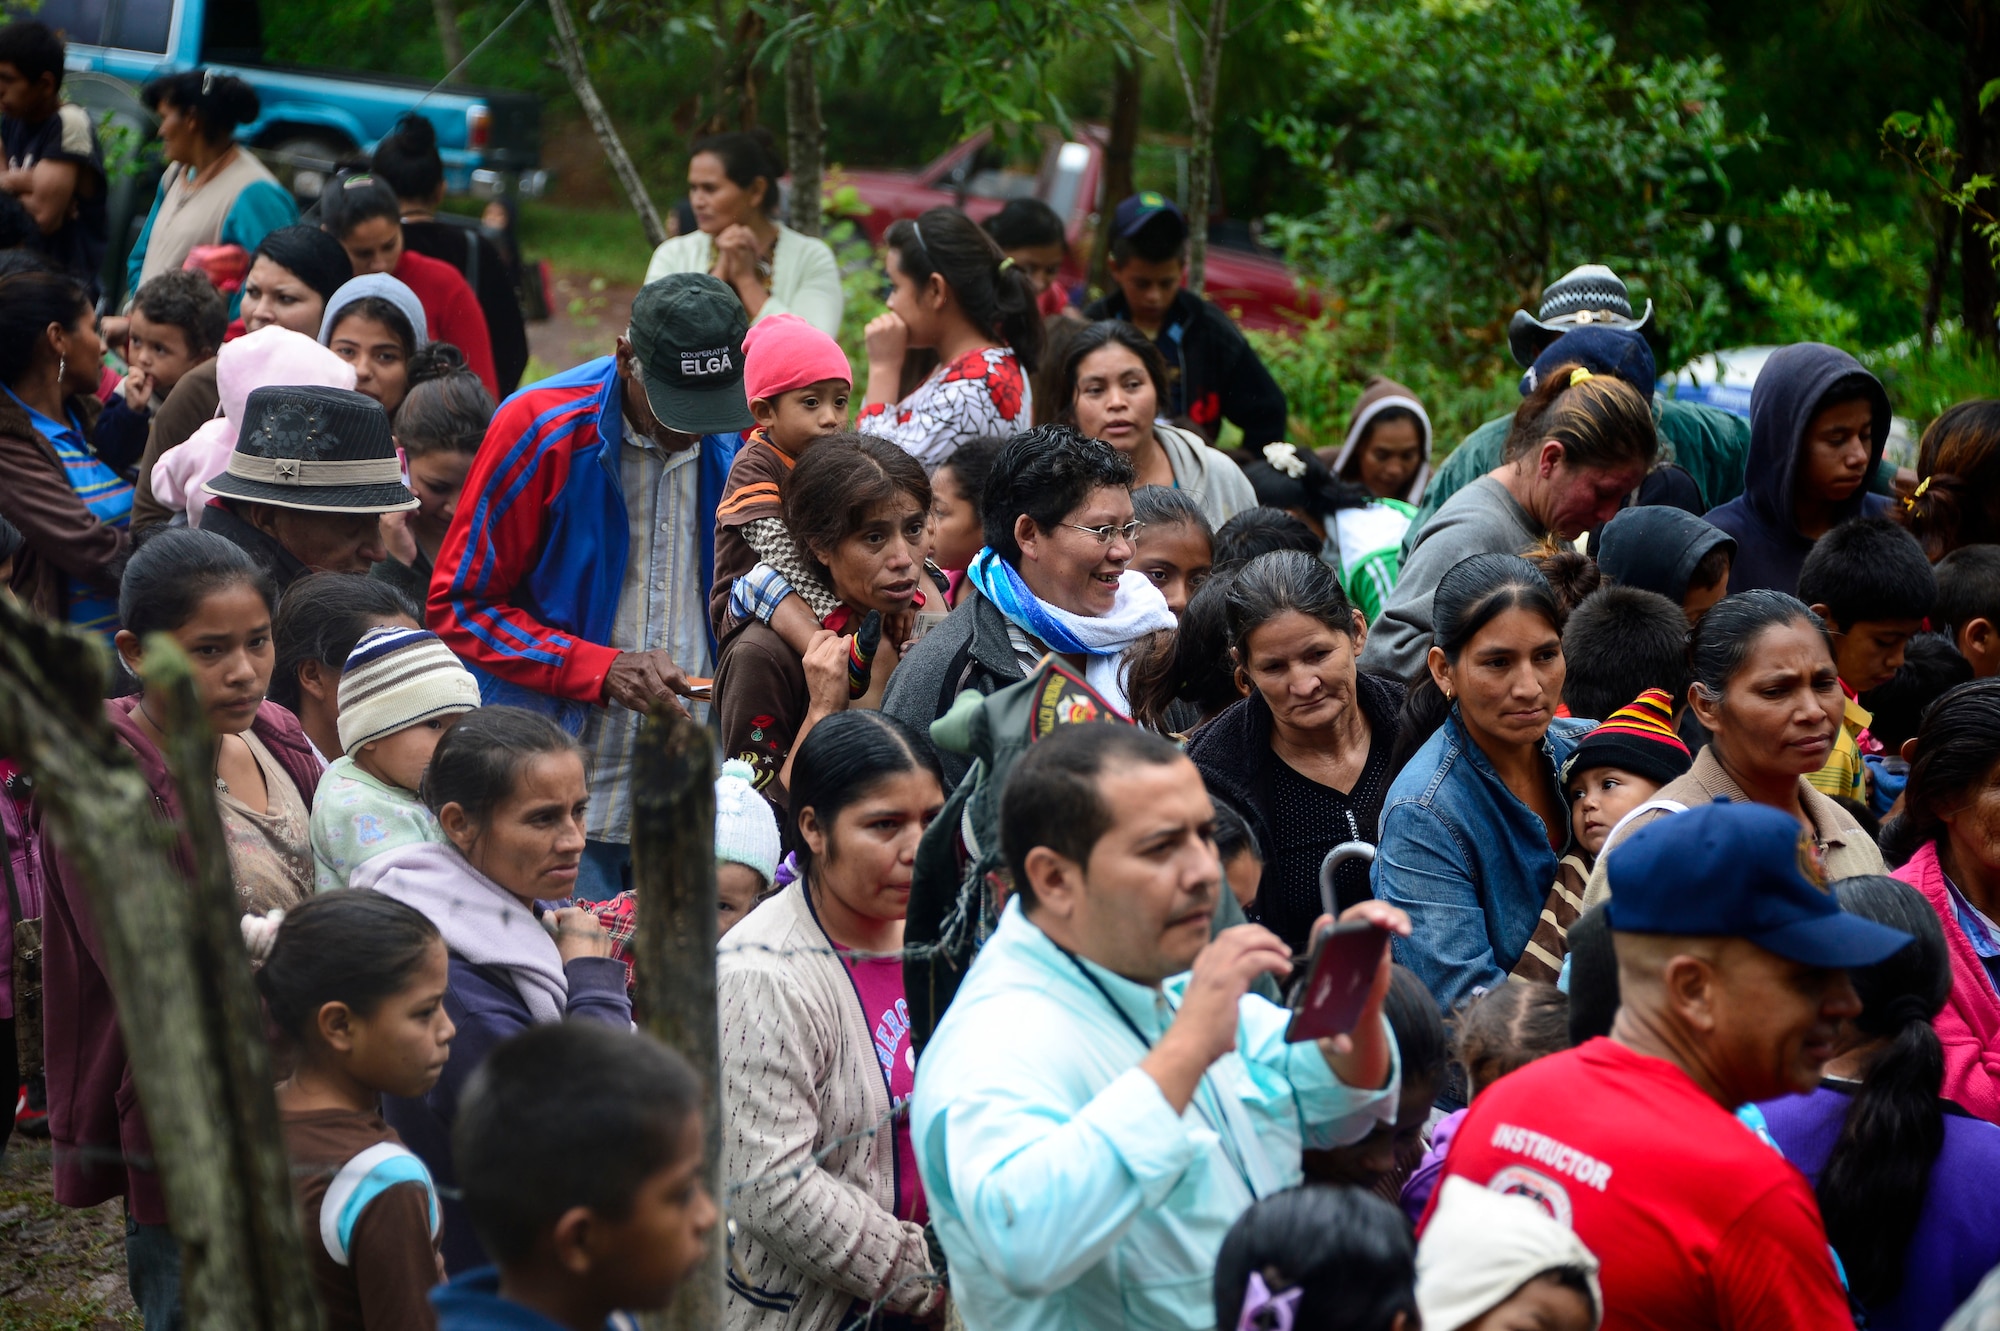 Villagers from Potrerillos, Siguatepeque, Honduras, line up to receive bags of food from members of Joint Task Force-Bravo, Oct. 25, 2014.  As part of the 57th Chapel Hike, more than130 members assigned to Joint Task Force-Bravo laced up their hiking boots and trekked almost four miles up a mountain to help deliver over 3,500-pounds of donated dry goods to villagers in need. (U.S. Air Force photo/Tech. Sgt. Heather Redman)